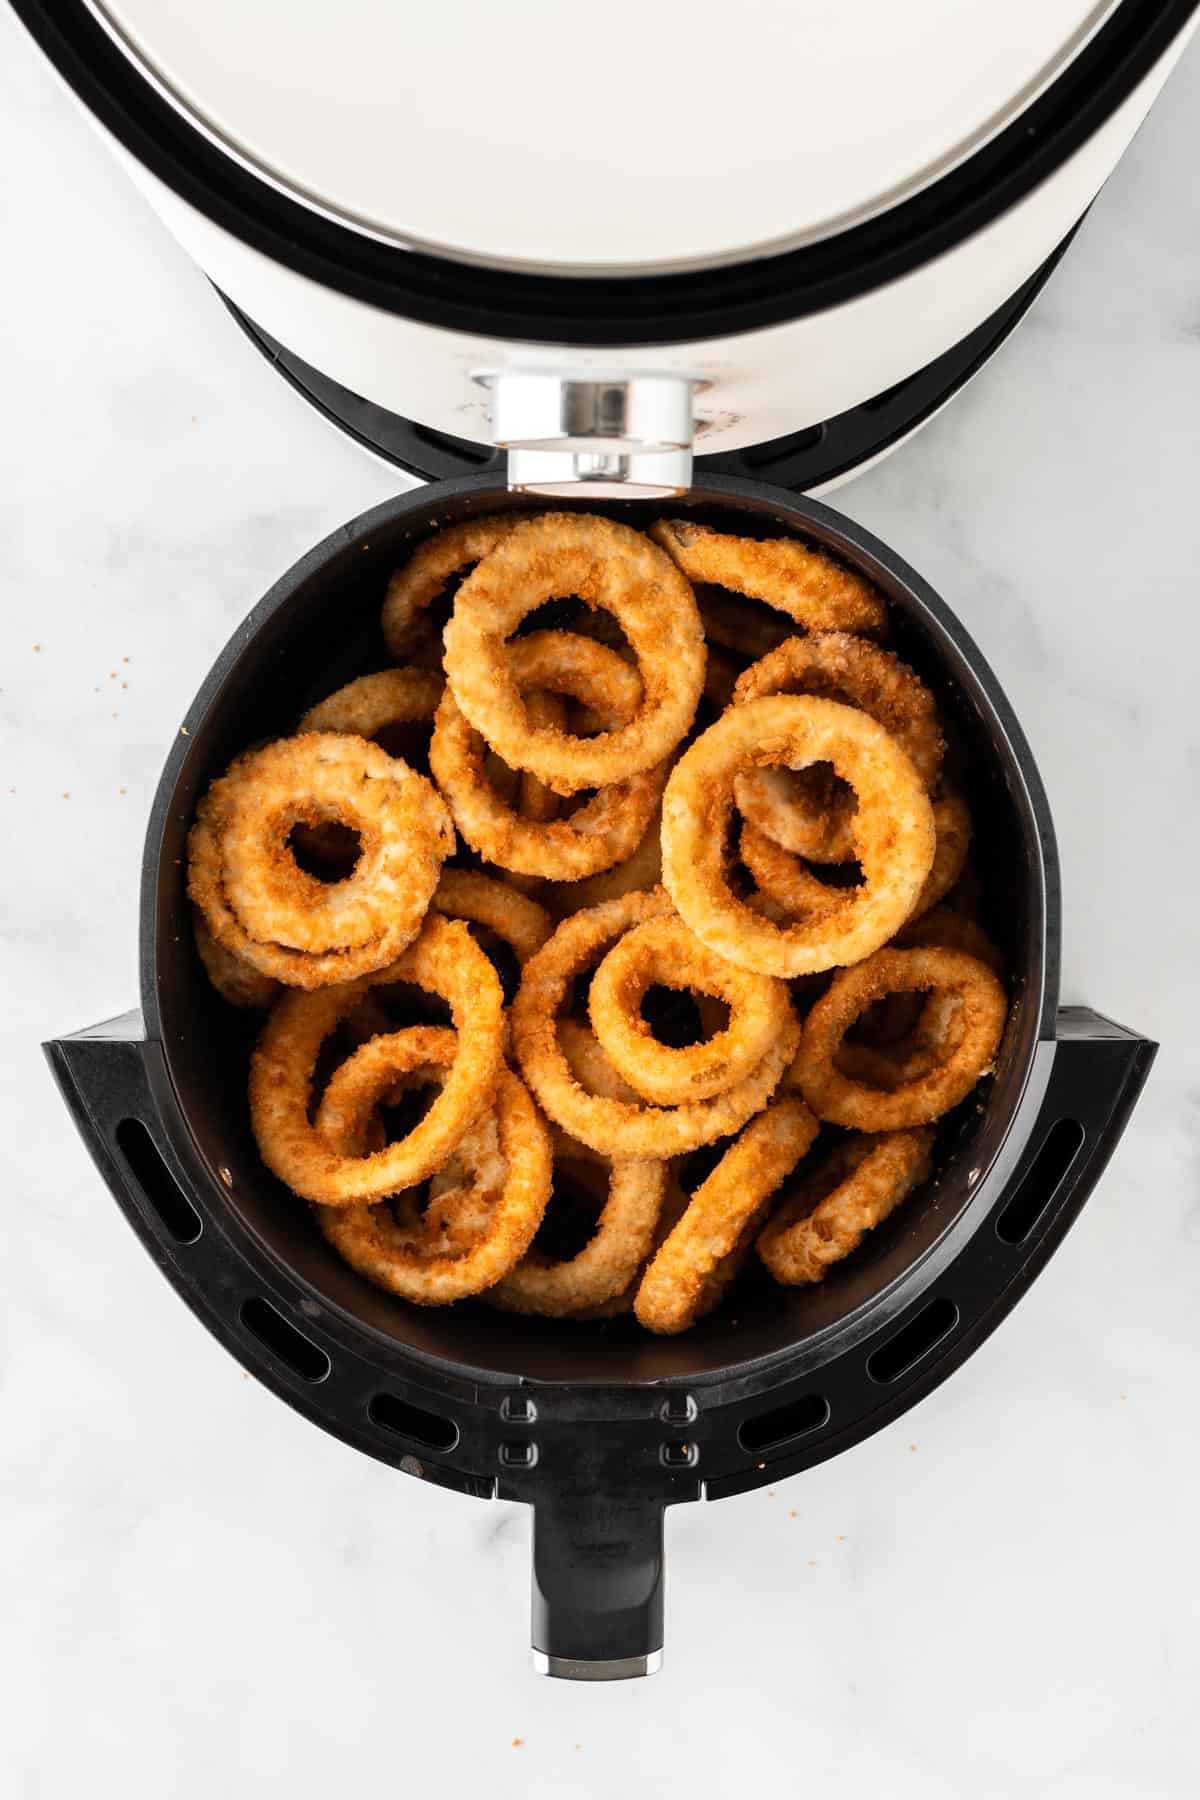 How To Make Frozen Onion Rings In Air Fryer